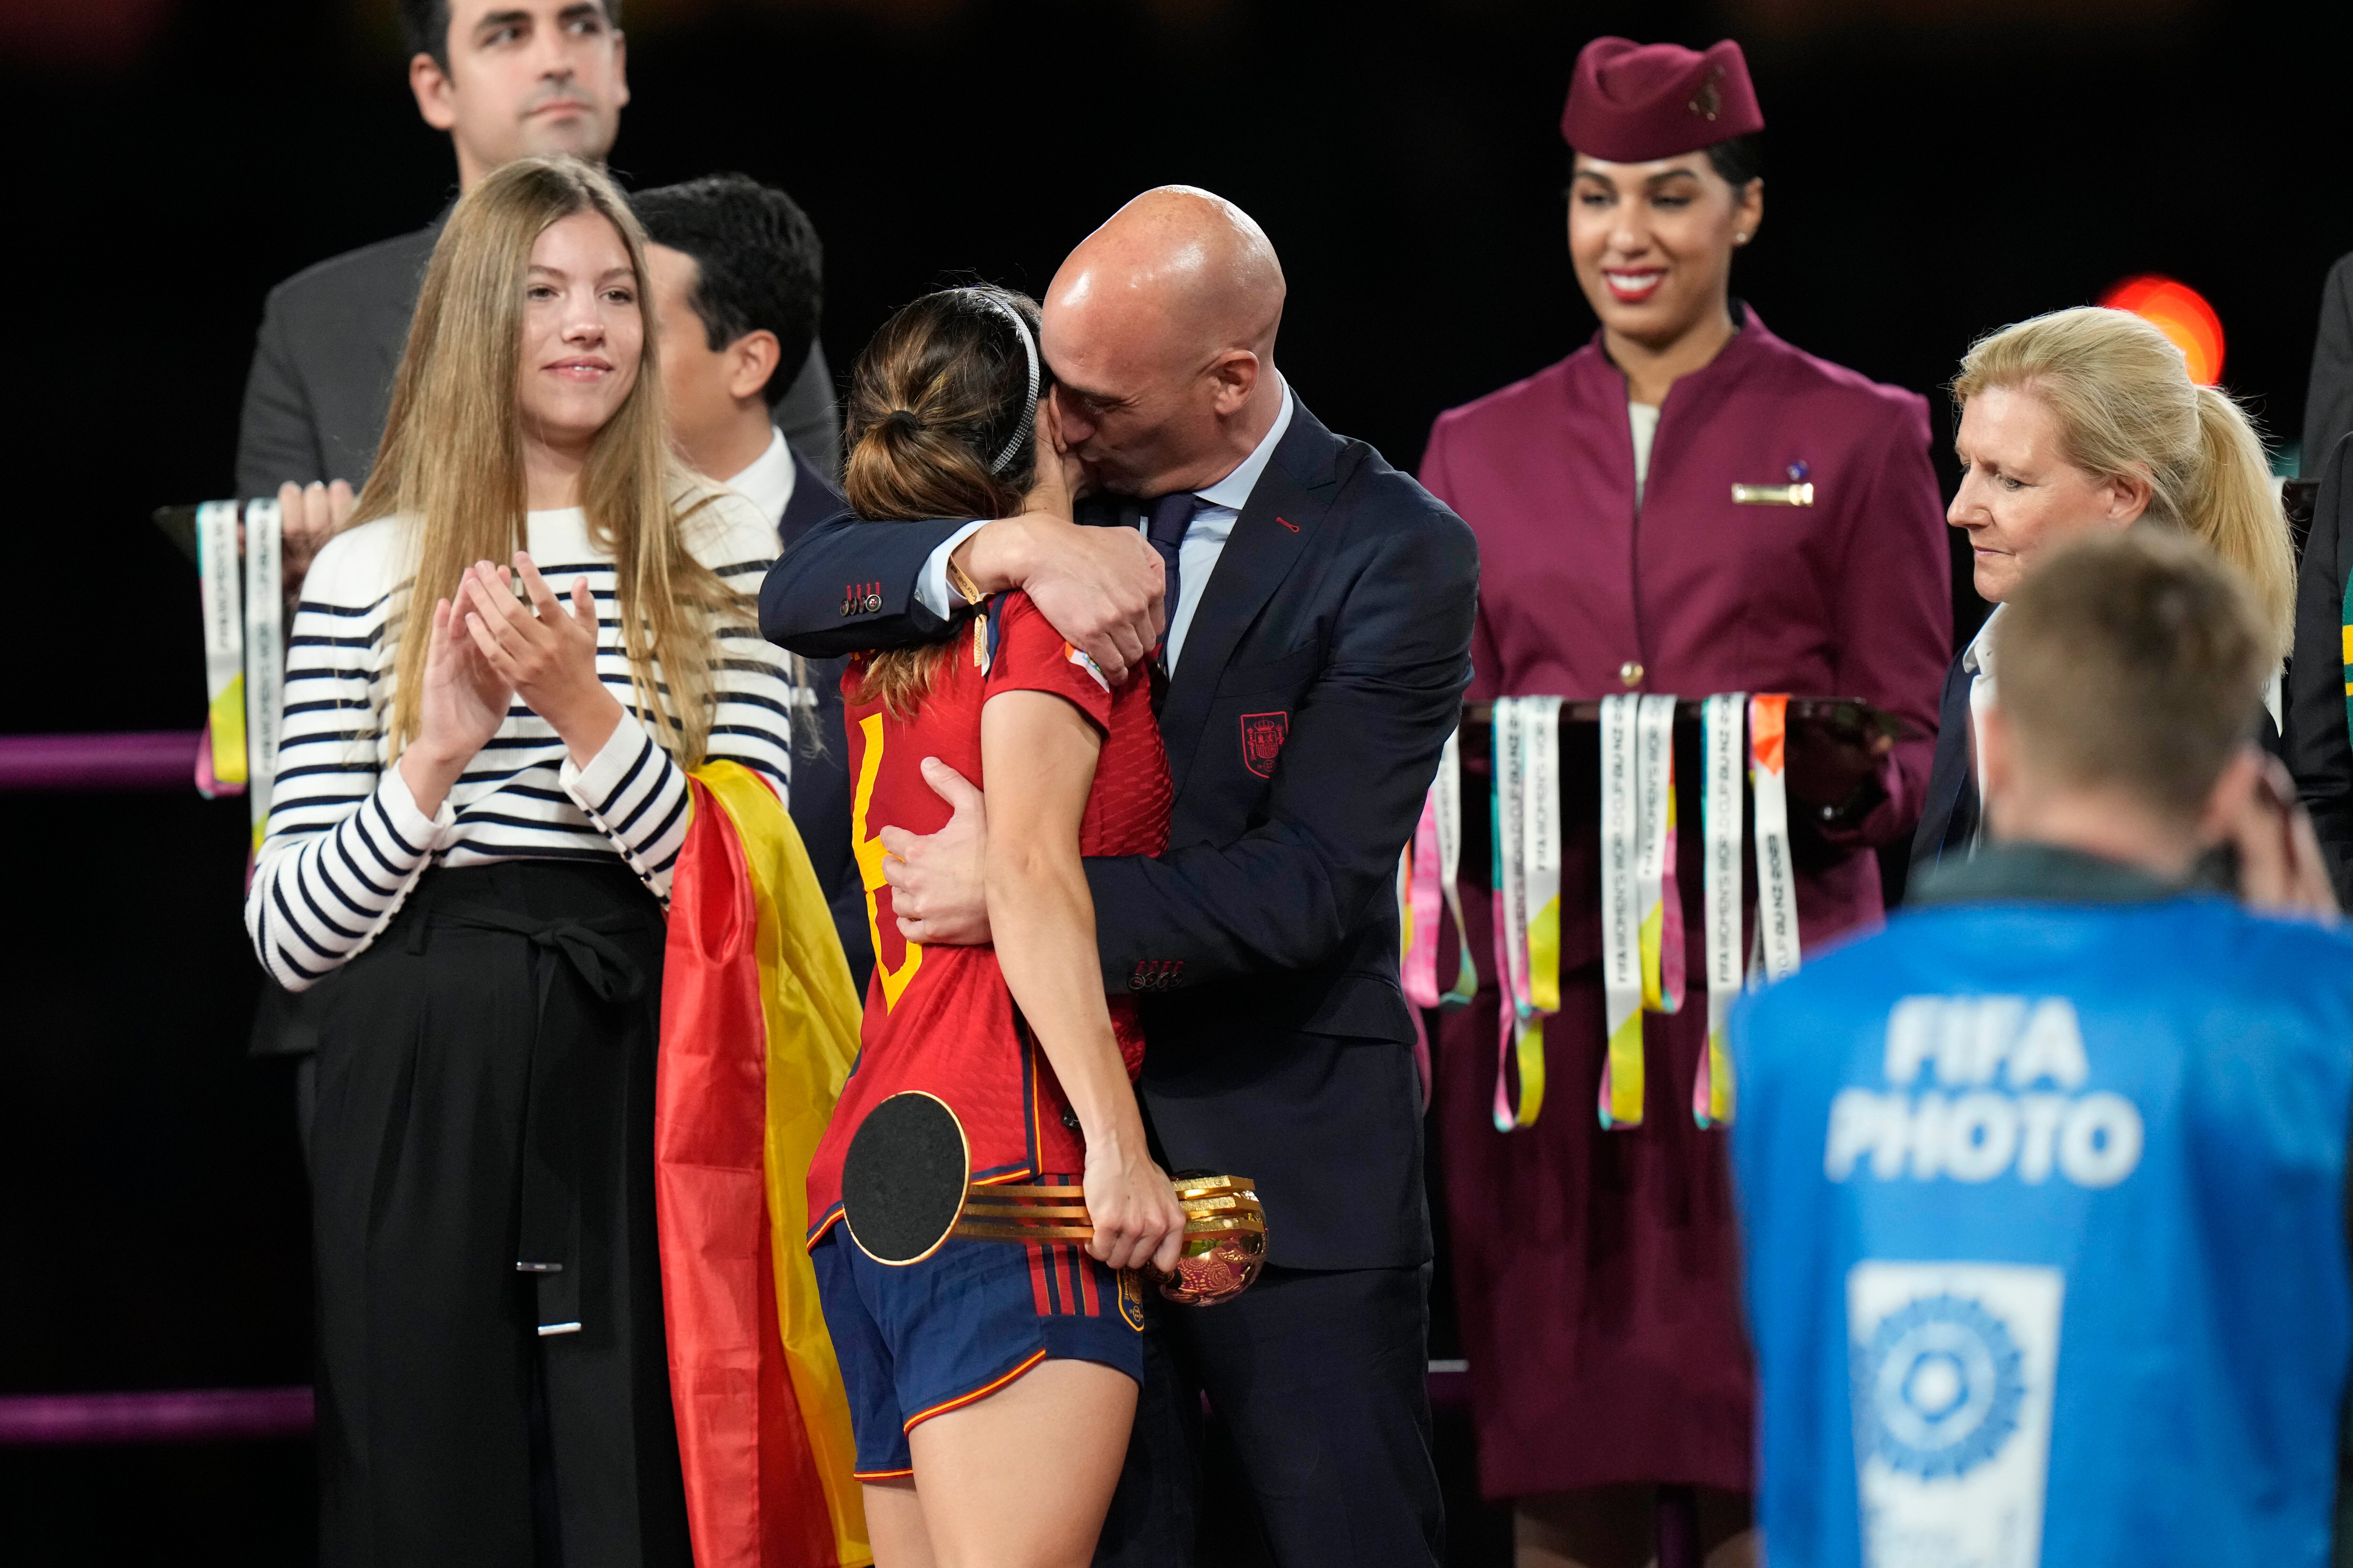 Rubiales’ conduct after the World Cup final was criticised